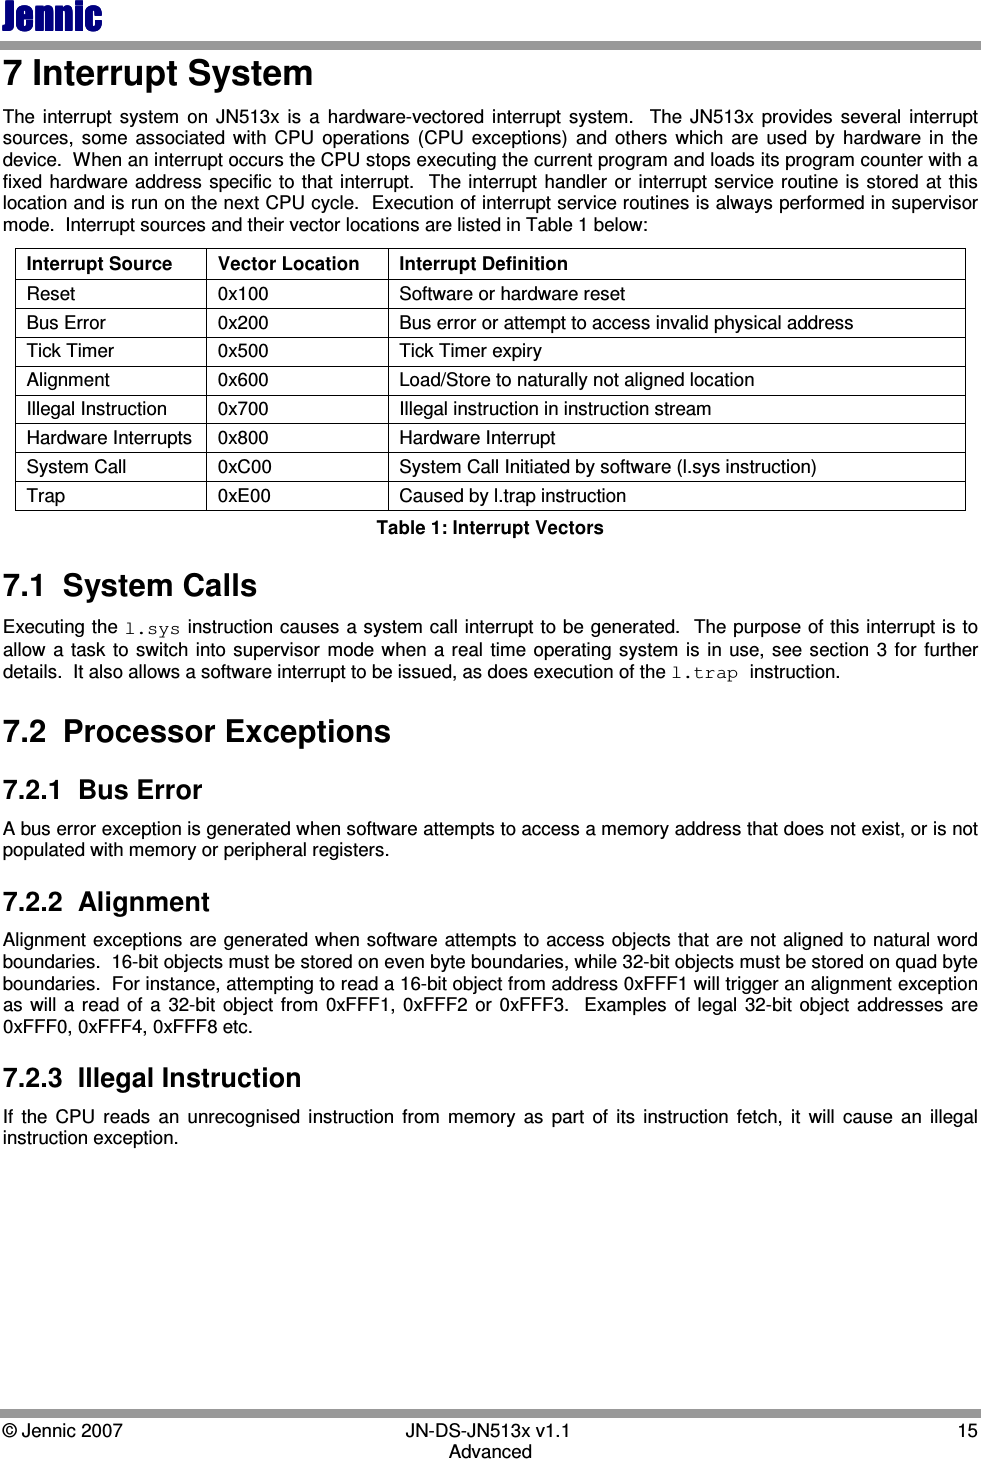 JennicJennicJennicJennic    © Jennic 2007        JN-DS-JN513x v1.1  15 Advanced 7 Interrupt System The  interrupt  system  on  JN513x  is  a  hardware-vectored  interrupt  system.    The  JN513x  provides  several  interrupt sources,  some  associated  with  CPU  operations  (CPU  exceptions)  and  others  which  are  used  by  hardware  in  the device.  When an interrupt occurs the CPU stops executing the current program and loads its program counter with a fixed hardware address specific to that interrupt.  The interrupt handler  or interrupt service routine is  stored at this location and is run on the next CPU cycle.  Execution of interrupt service routines is always performed in supervisor mode.  Interrupt sources and their vector locations are listed in Table 1 below: Interrupt Source  Vector Location  Interrupt Definition Reset  0x100  Software or hardware reset Bus Error  0x200   Bus error or attempt to access invalid physical address Tick Timer  0x500  Tick Timer expiry Alignment  0x600  Load/Store to naturally not aligned location Illegal Instruction  0x700  Illegal instruction in instruction stream Hardware Interrupts  0x800  Hardware Interrupt  System Call  0xC00  System Call Initiated by software (l.sys instruction) Trap  0xE00  Caused by l.trap instruction Table 1: Interrupt Vectors 7.1  System Calls Executing the l.sys instruction causes a system call interrupt to be generated.  The purpose of this interrupt is to allow  a  task  to  switch  into supervisor  mode when  a real  time  operating system  is  in use,  see  section  3 for  further details.  It also allows a software interrupt to be issued, as does execution of the l.trap instruction. 7.2  Processor Exceptions 7.2.1  Bus Error A bus error exception is generated when software attempts to access a memory address that does not exist, or is not populated with memory or peripheral registers. 7.2.2  Alignment Alignment exceptions are generated when software  attempts to access objects that are not aligned to natural word boundaries.  16-bit objects must be stored on even byte boundaries, while 32-bit objects must be stored on quad byte boundaries.  For instance, attempting to read a 16-bit object from address 0xFFF1 will trigger an alignment exception as will a  read  of  a  32-bit  object  from  0xFFF1, 0xFFF2  or  0xFFF3.   Examples  of  legal  32-bit  object  addresses  are 0xFFF0, 0xFFF4, 0xFFF8 etc. 7.2.3  Illegal Instruction If  the  CPU  reads  an  unrecognised  instruction  from  memory  as  part  of  its  instruction  fetch,  it  will  cause  an  illegal instruction exception.   